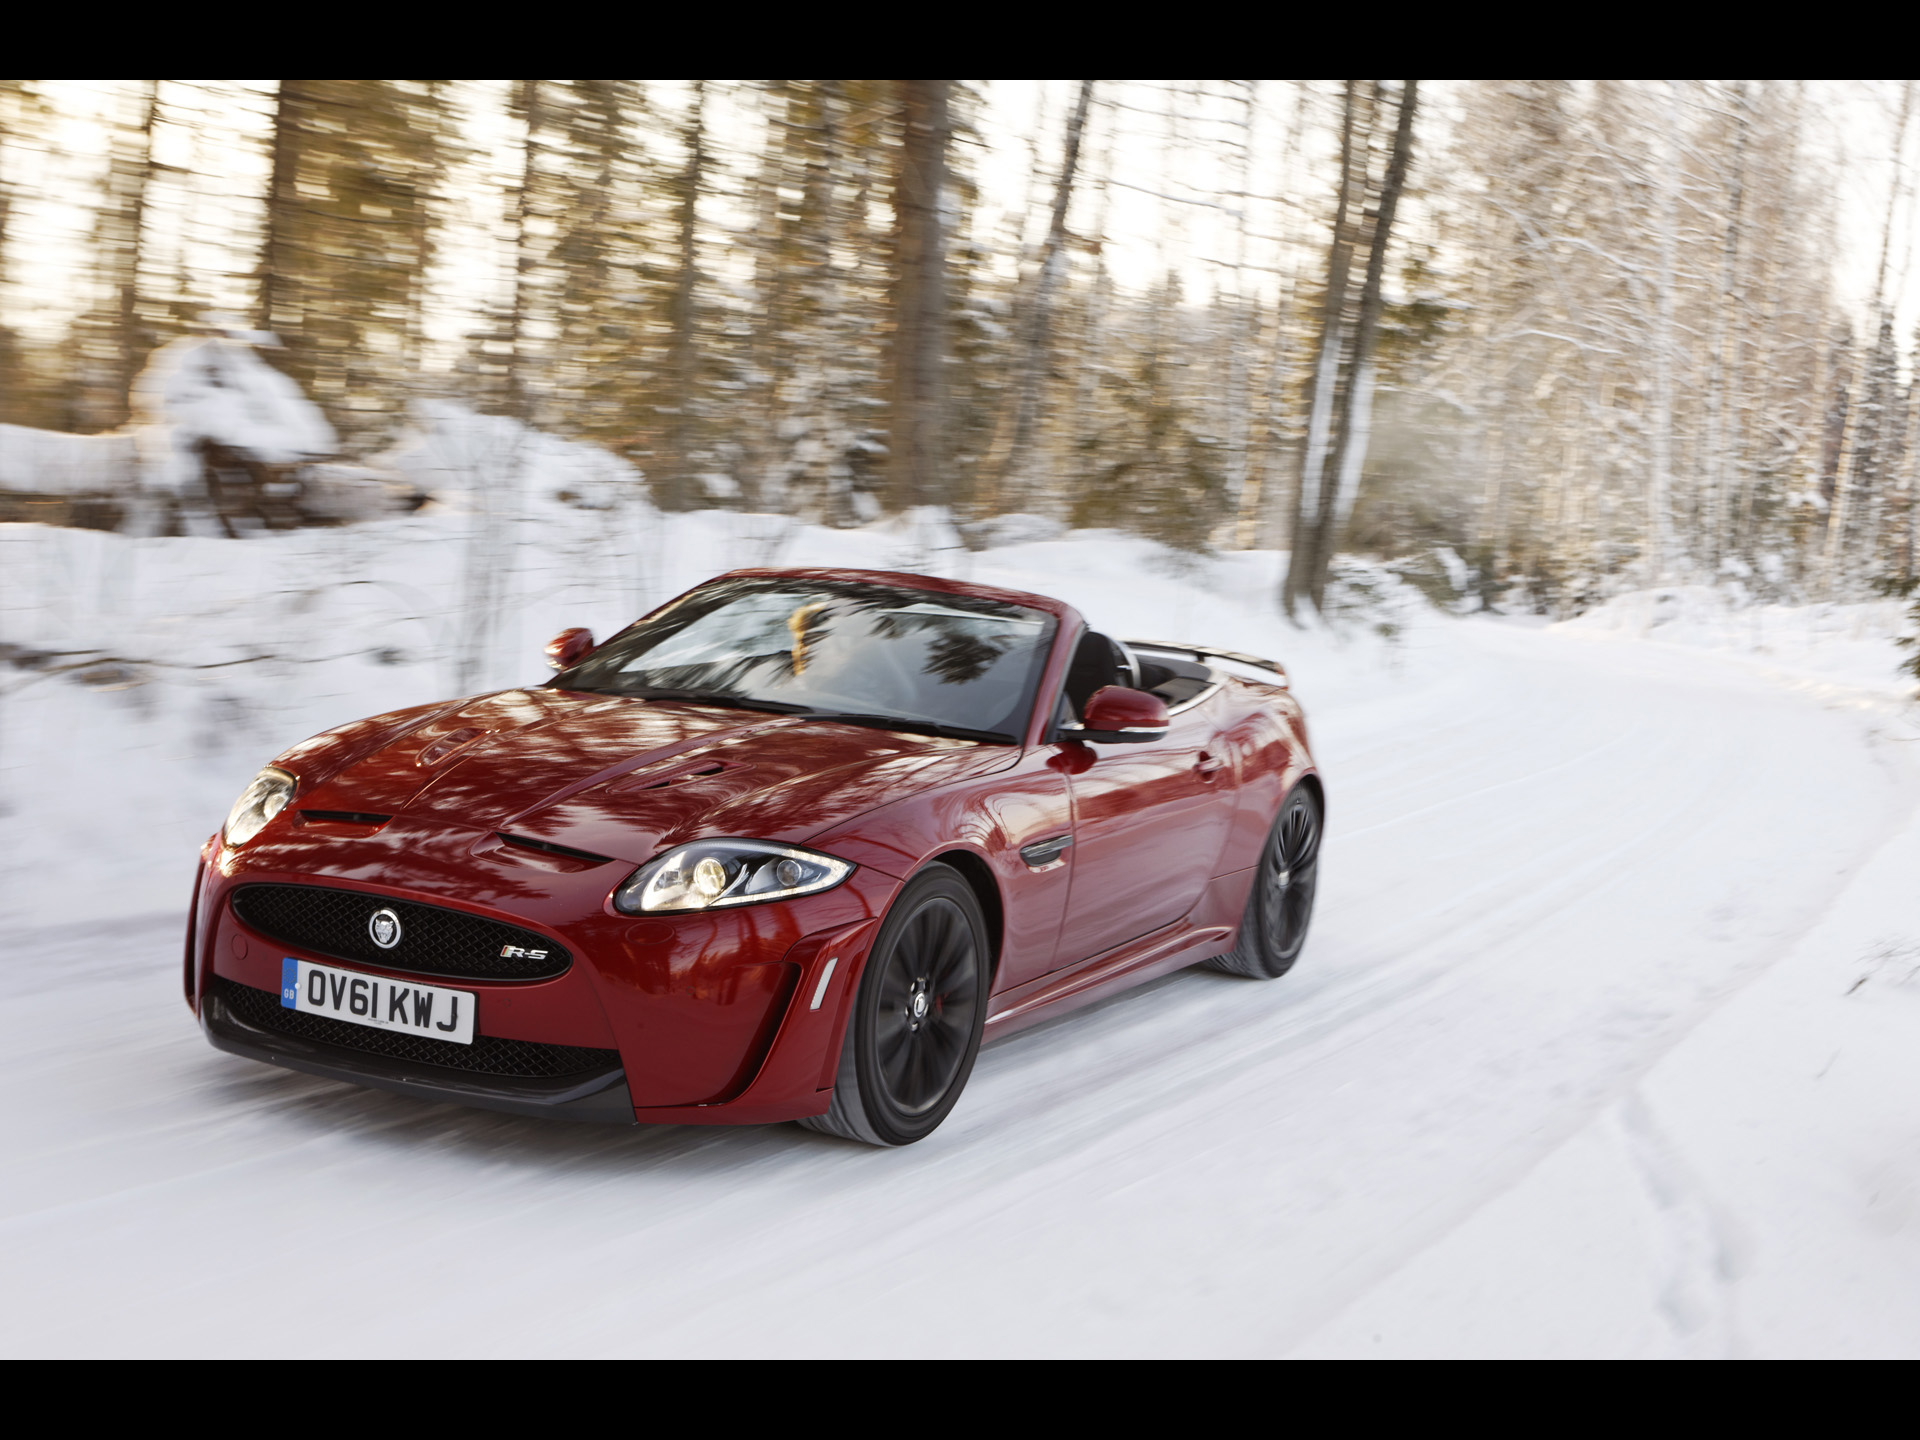 2012-Jaguar-XKR-S-Convertible-Nordic-Drive-Red-Front-Angle-Drive-Topless-2-1920x1440.jpg